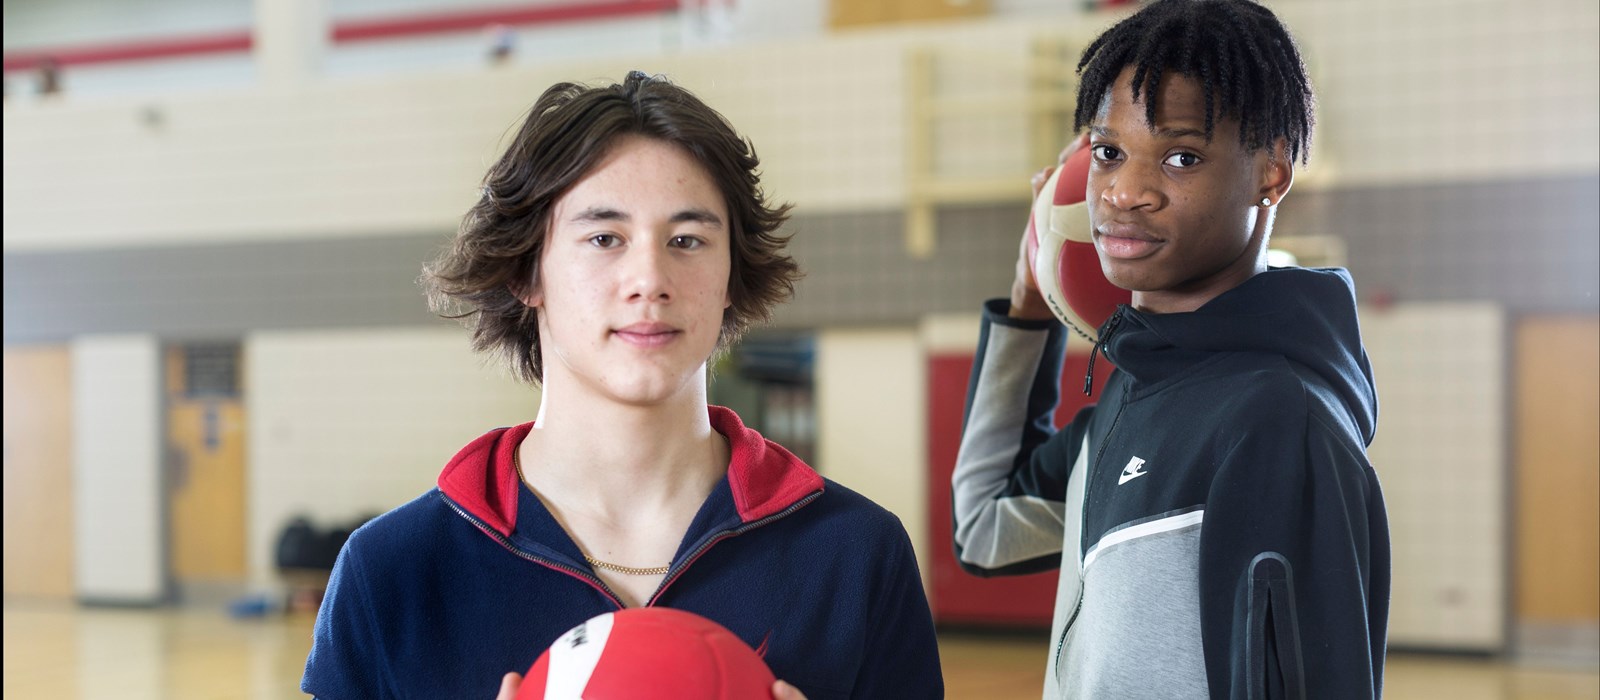 Two students holding volleyballs